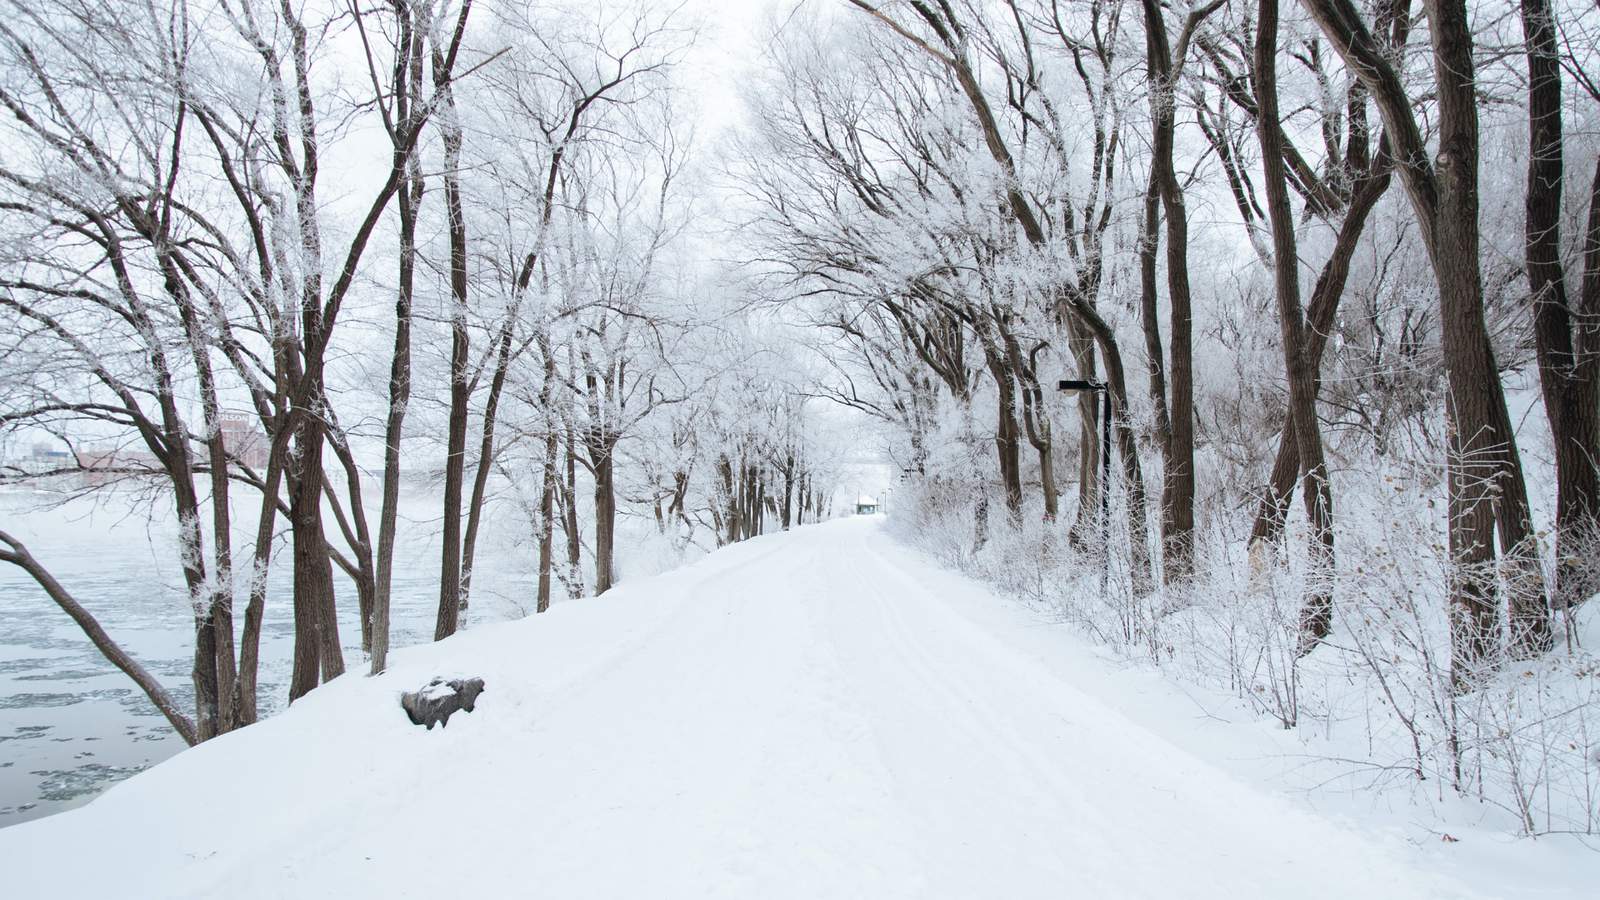 Winter storm update: Current snow totals for Metro Detroit Sunday